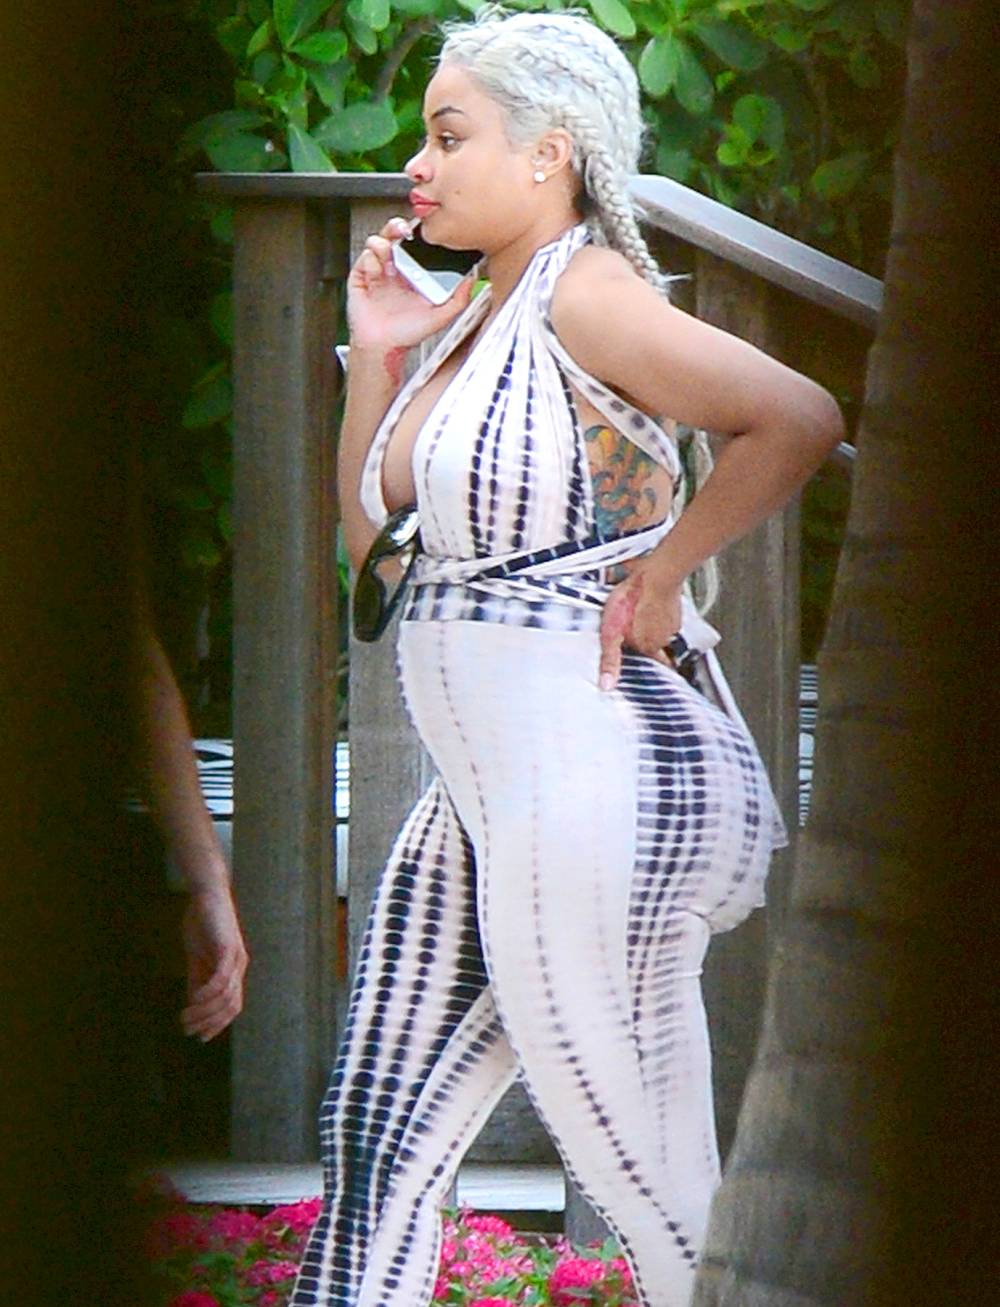 Blac Chyna shows her baby bump in tie-dye jumpsuit while dining with a couple of friends at the W Hotel.